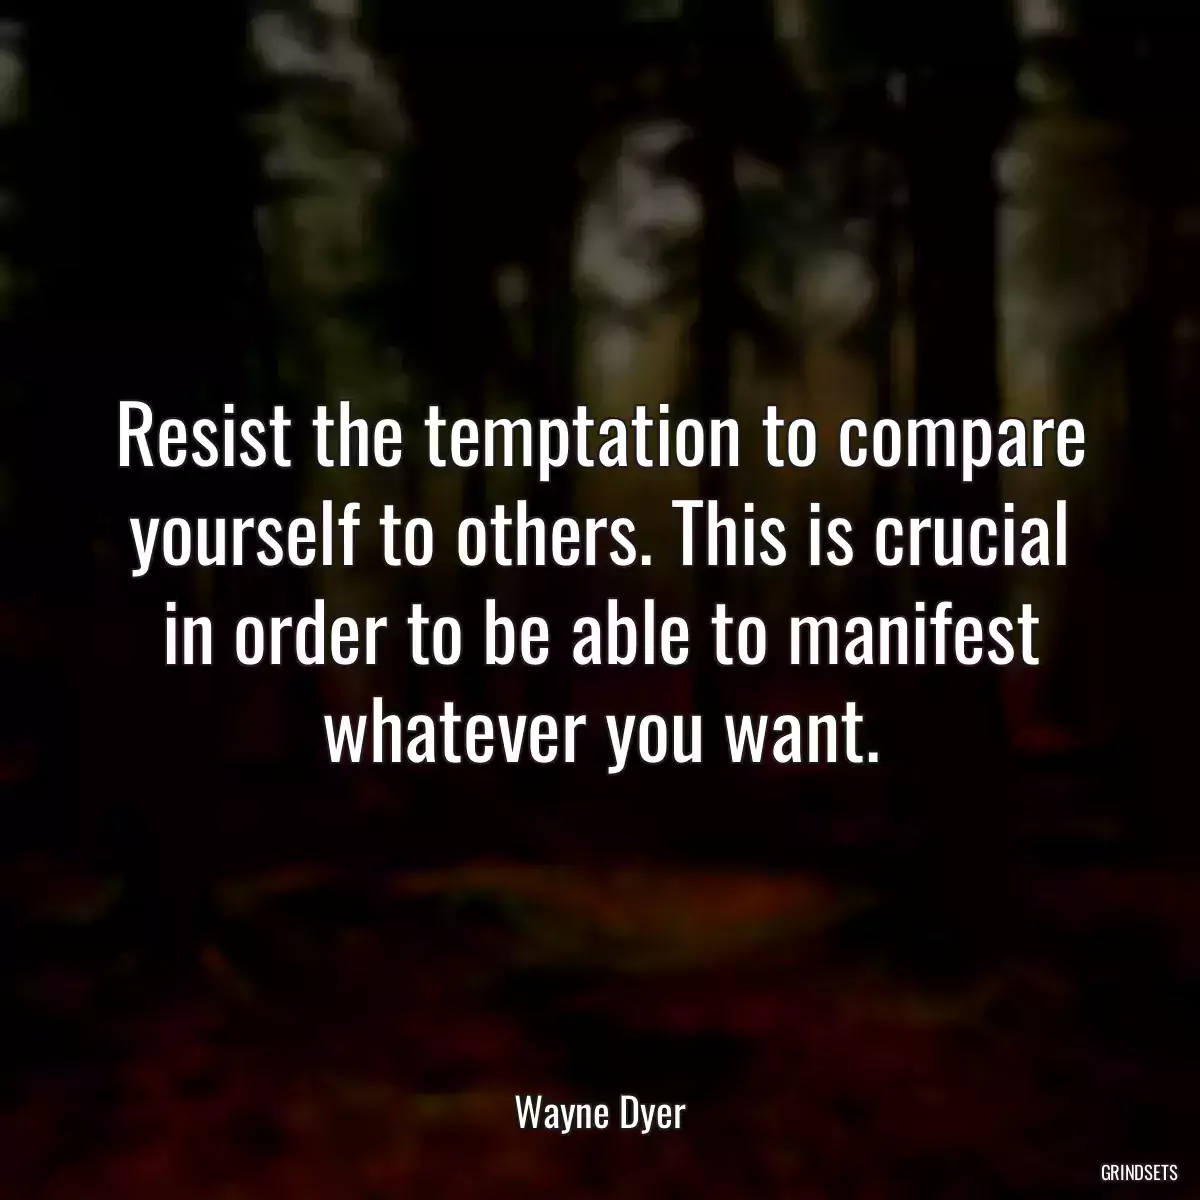 Resist the temptation to compare yourself to others. This is crucial in order to be able to manifest whatever you want.